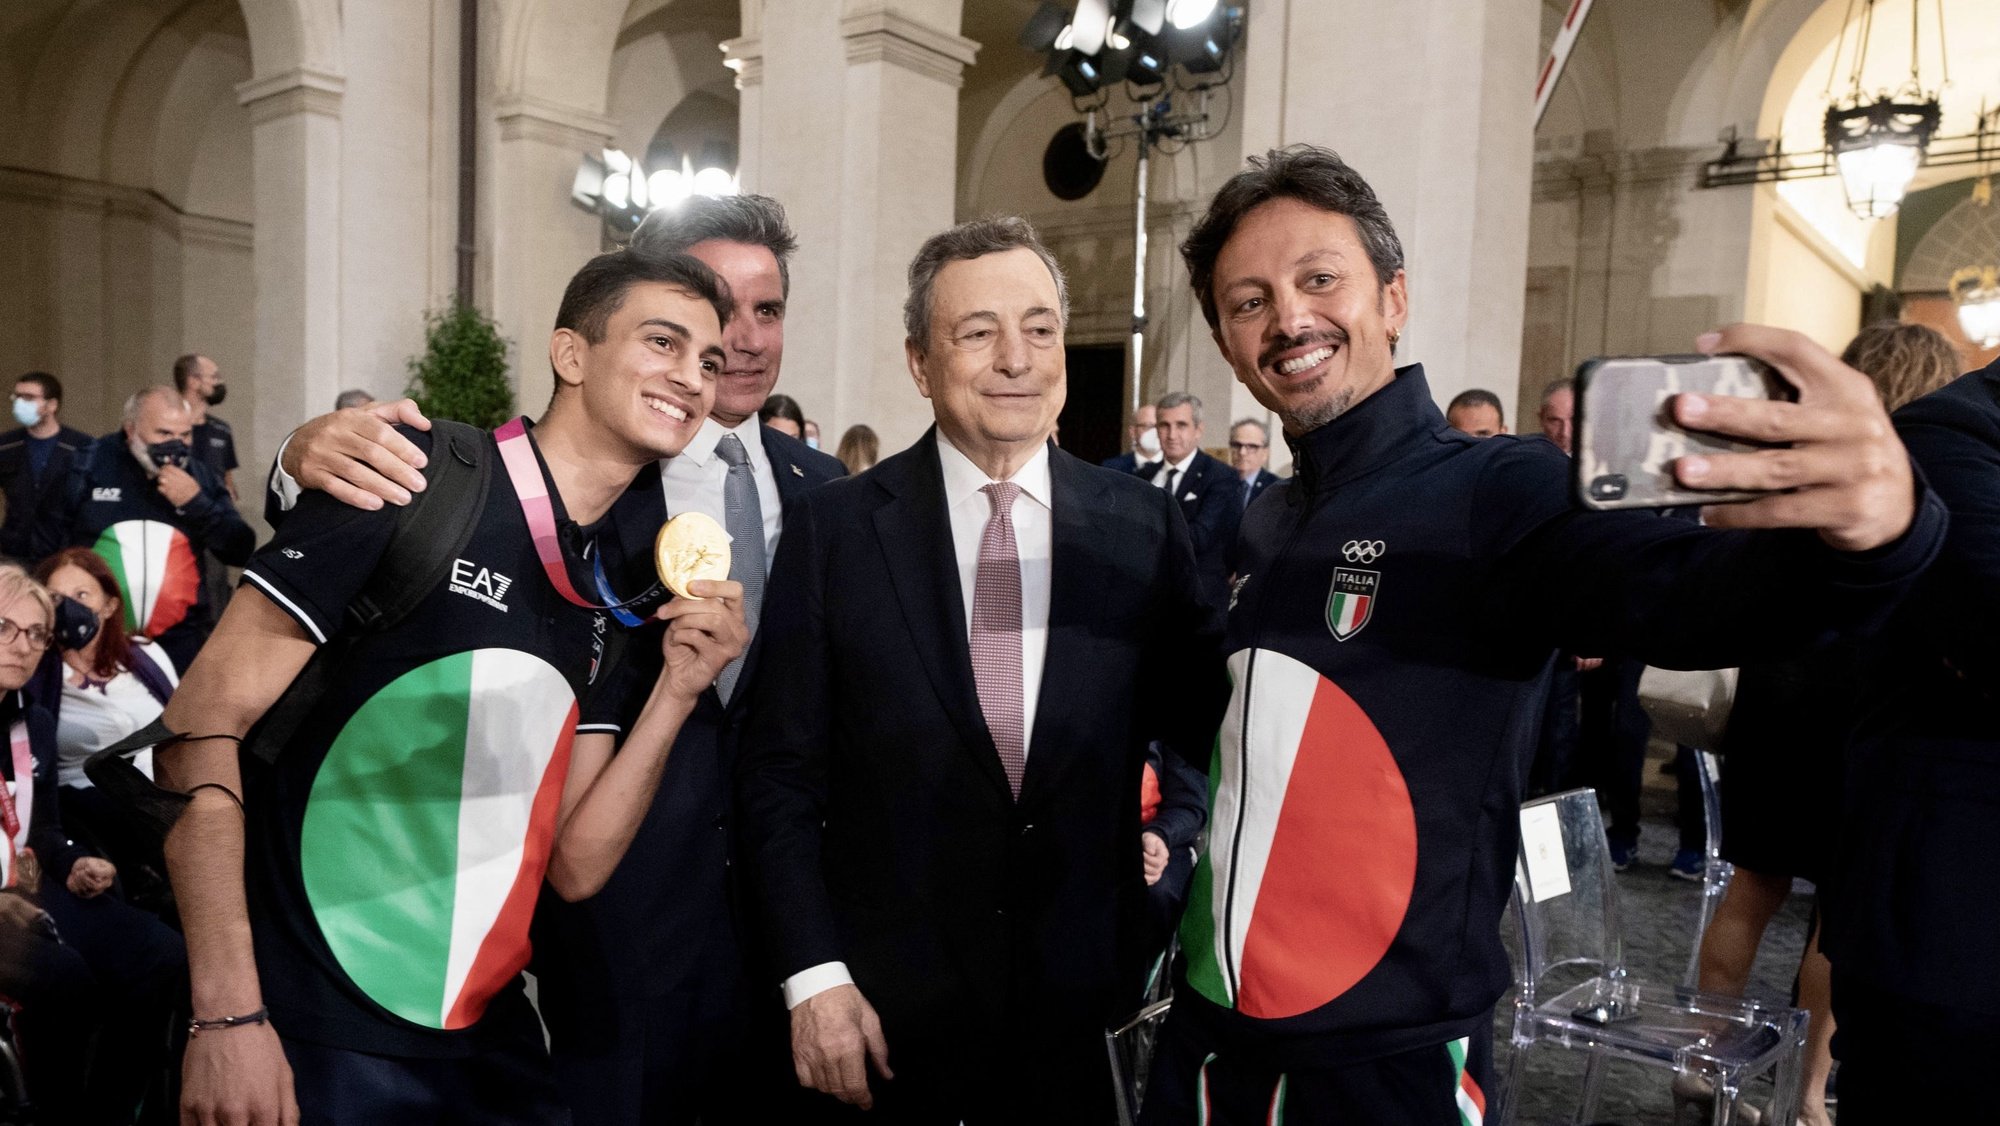 epa09484349 A handout photo made available by the Chigi Palace Press Office shows Italian Prime Minister Mario Draghi receiving the Italian medalists of the Tokyo 2020 Olympic and Paralympic Games at Chigi Palace in Rome, Italy, 23 September 2021.  EPA/CHIGI PALACE PRESS OFFICE HANDOUT  HANDOUT EDITORIAL USE ONLY/NO SALES